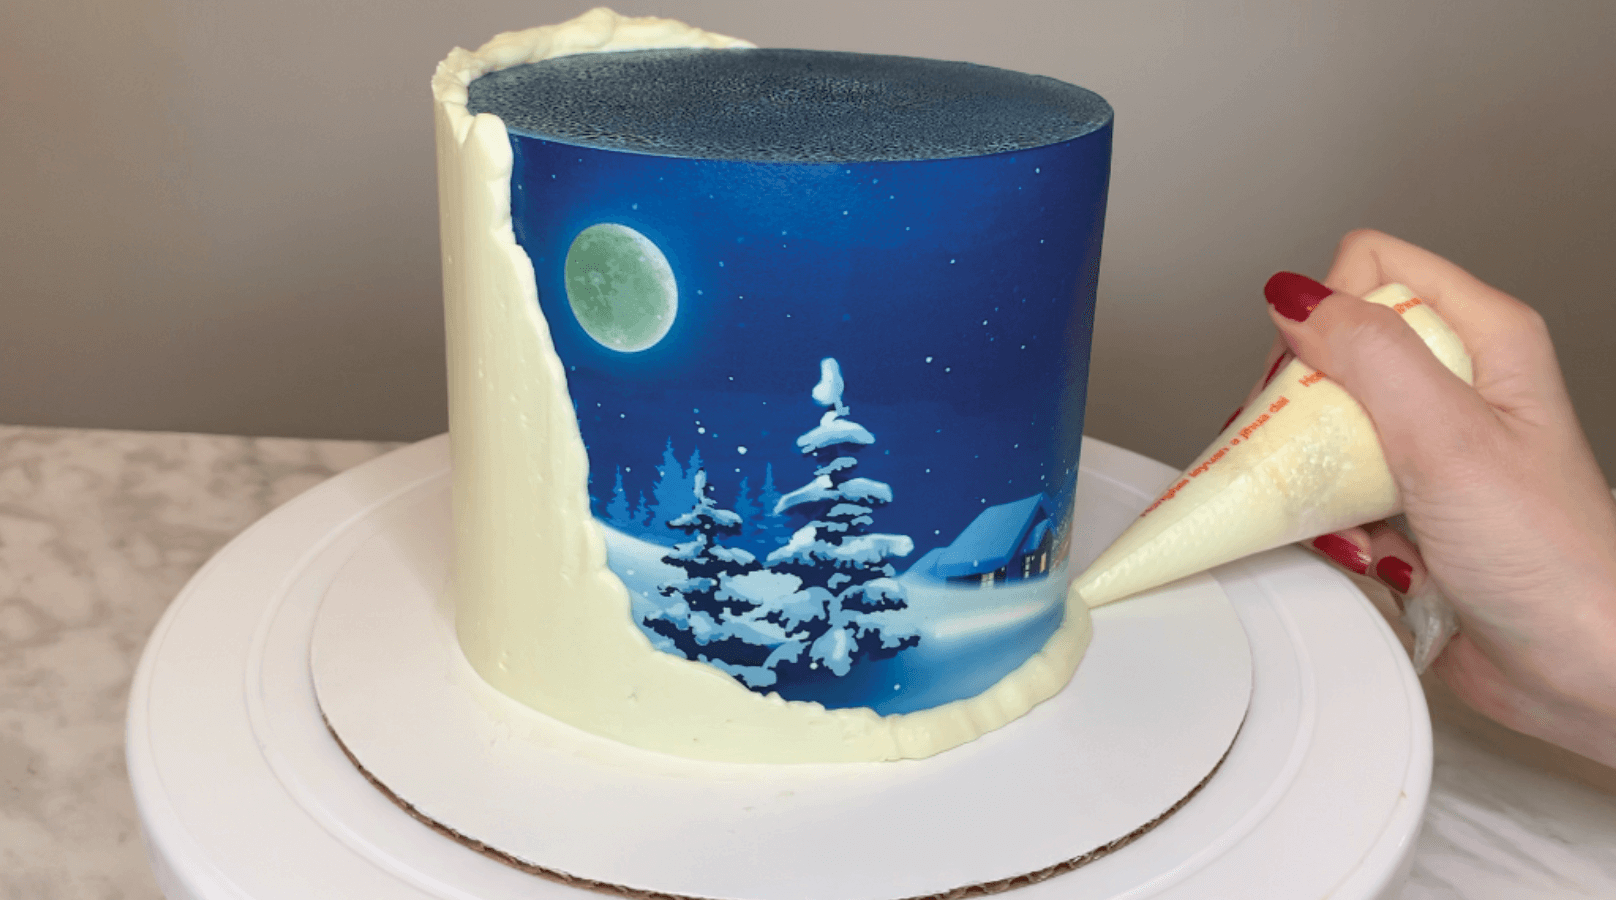 “Winter Night” Exclusive Cake Decorating Class With Pamela from Buttercut Bakery.